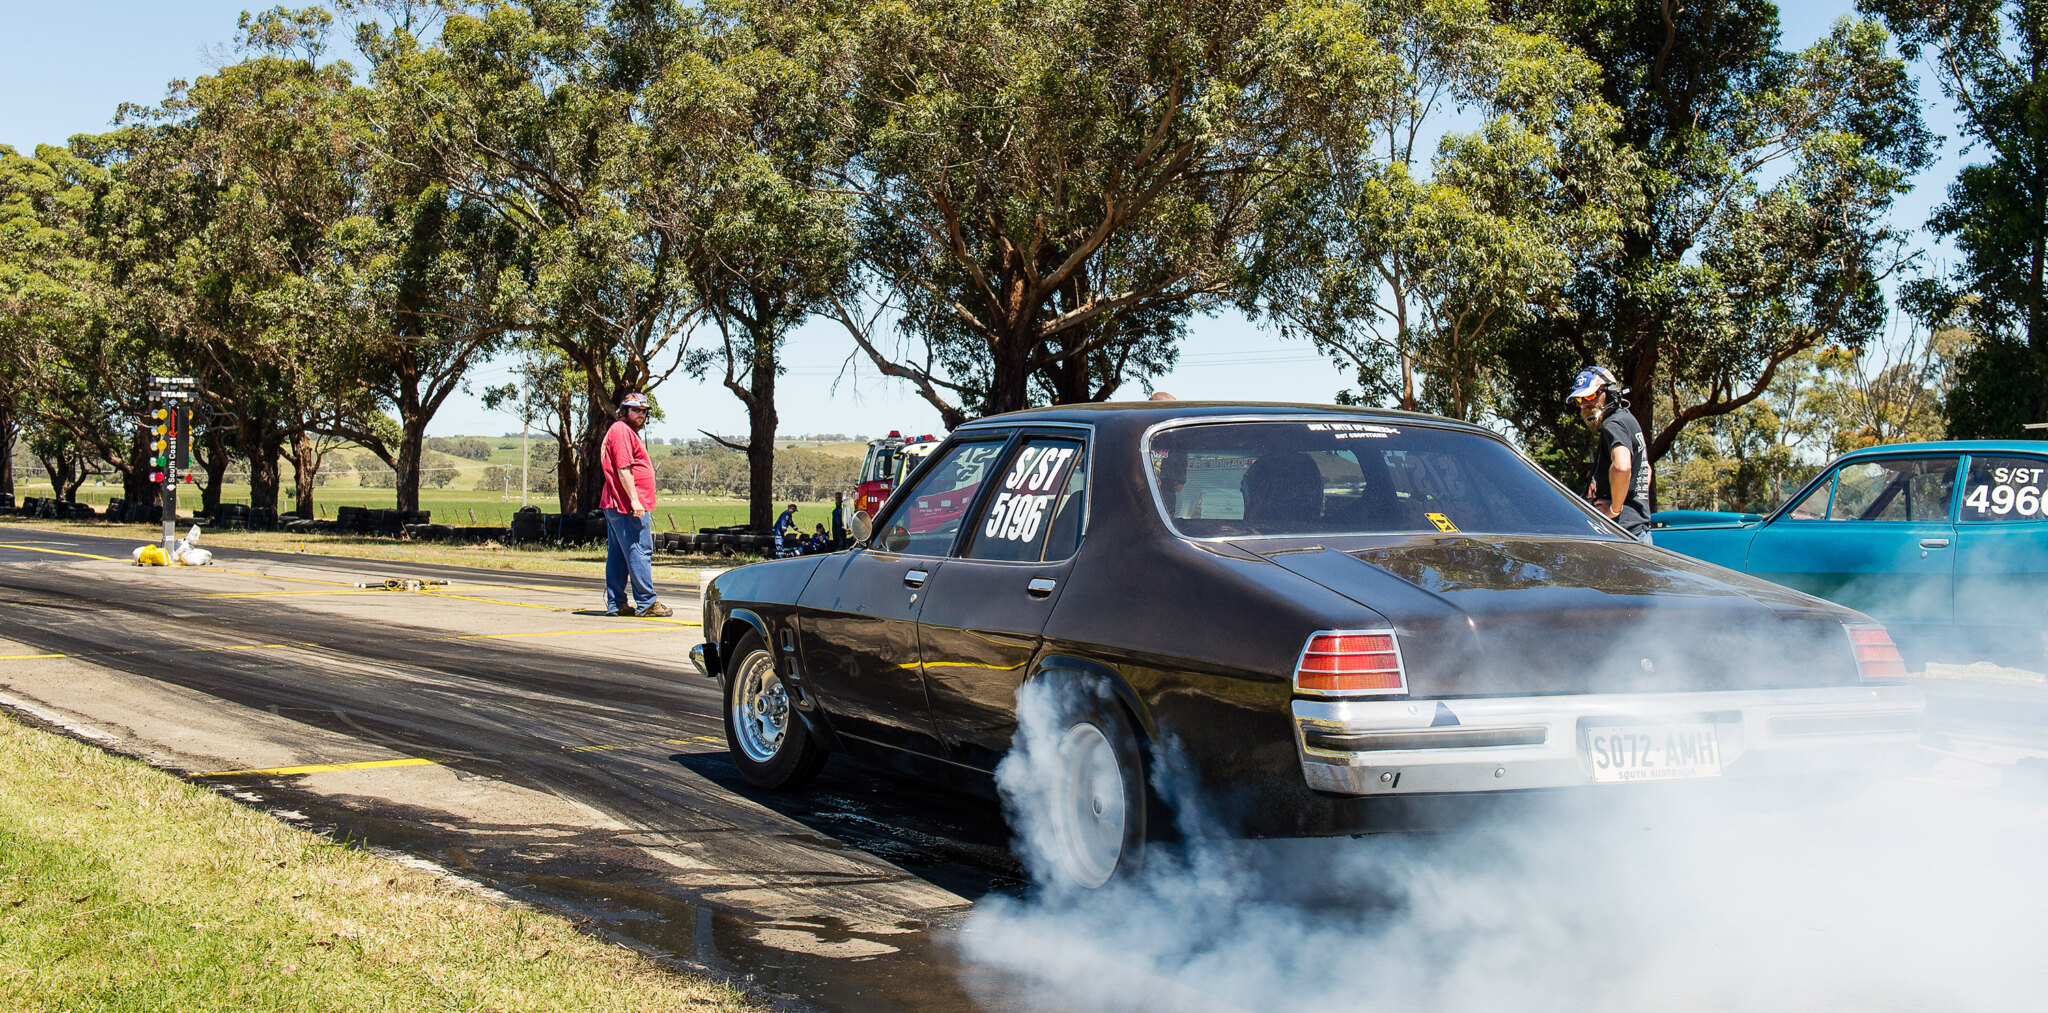 The real deal: Casterton Street Drags